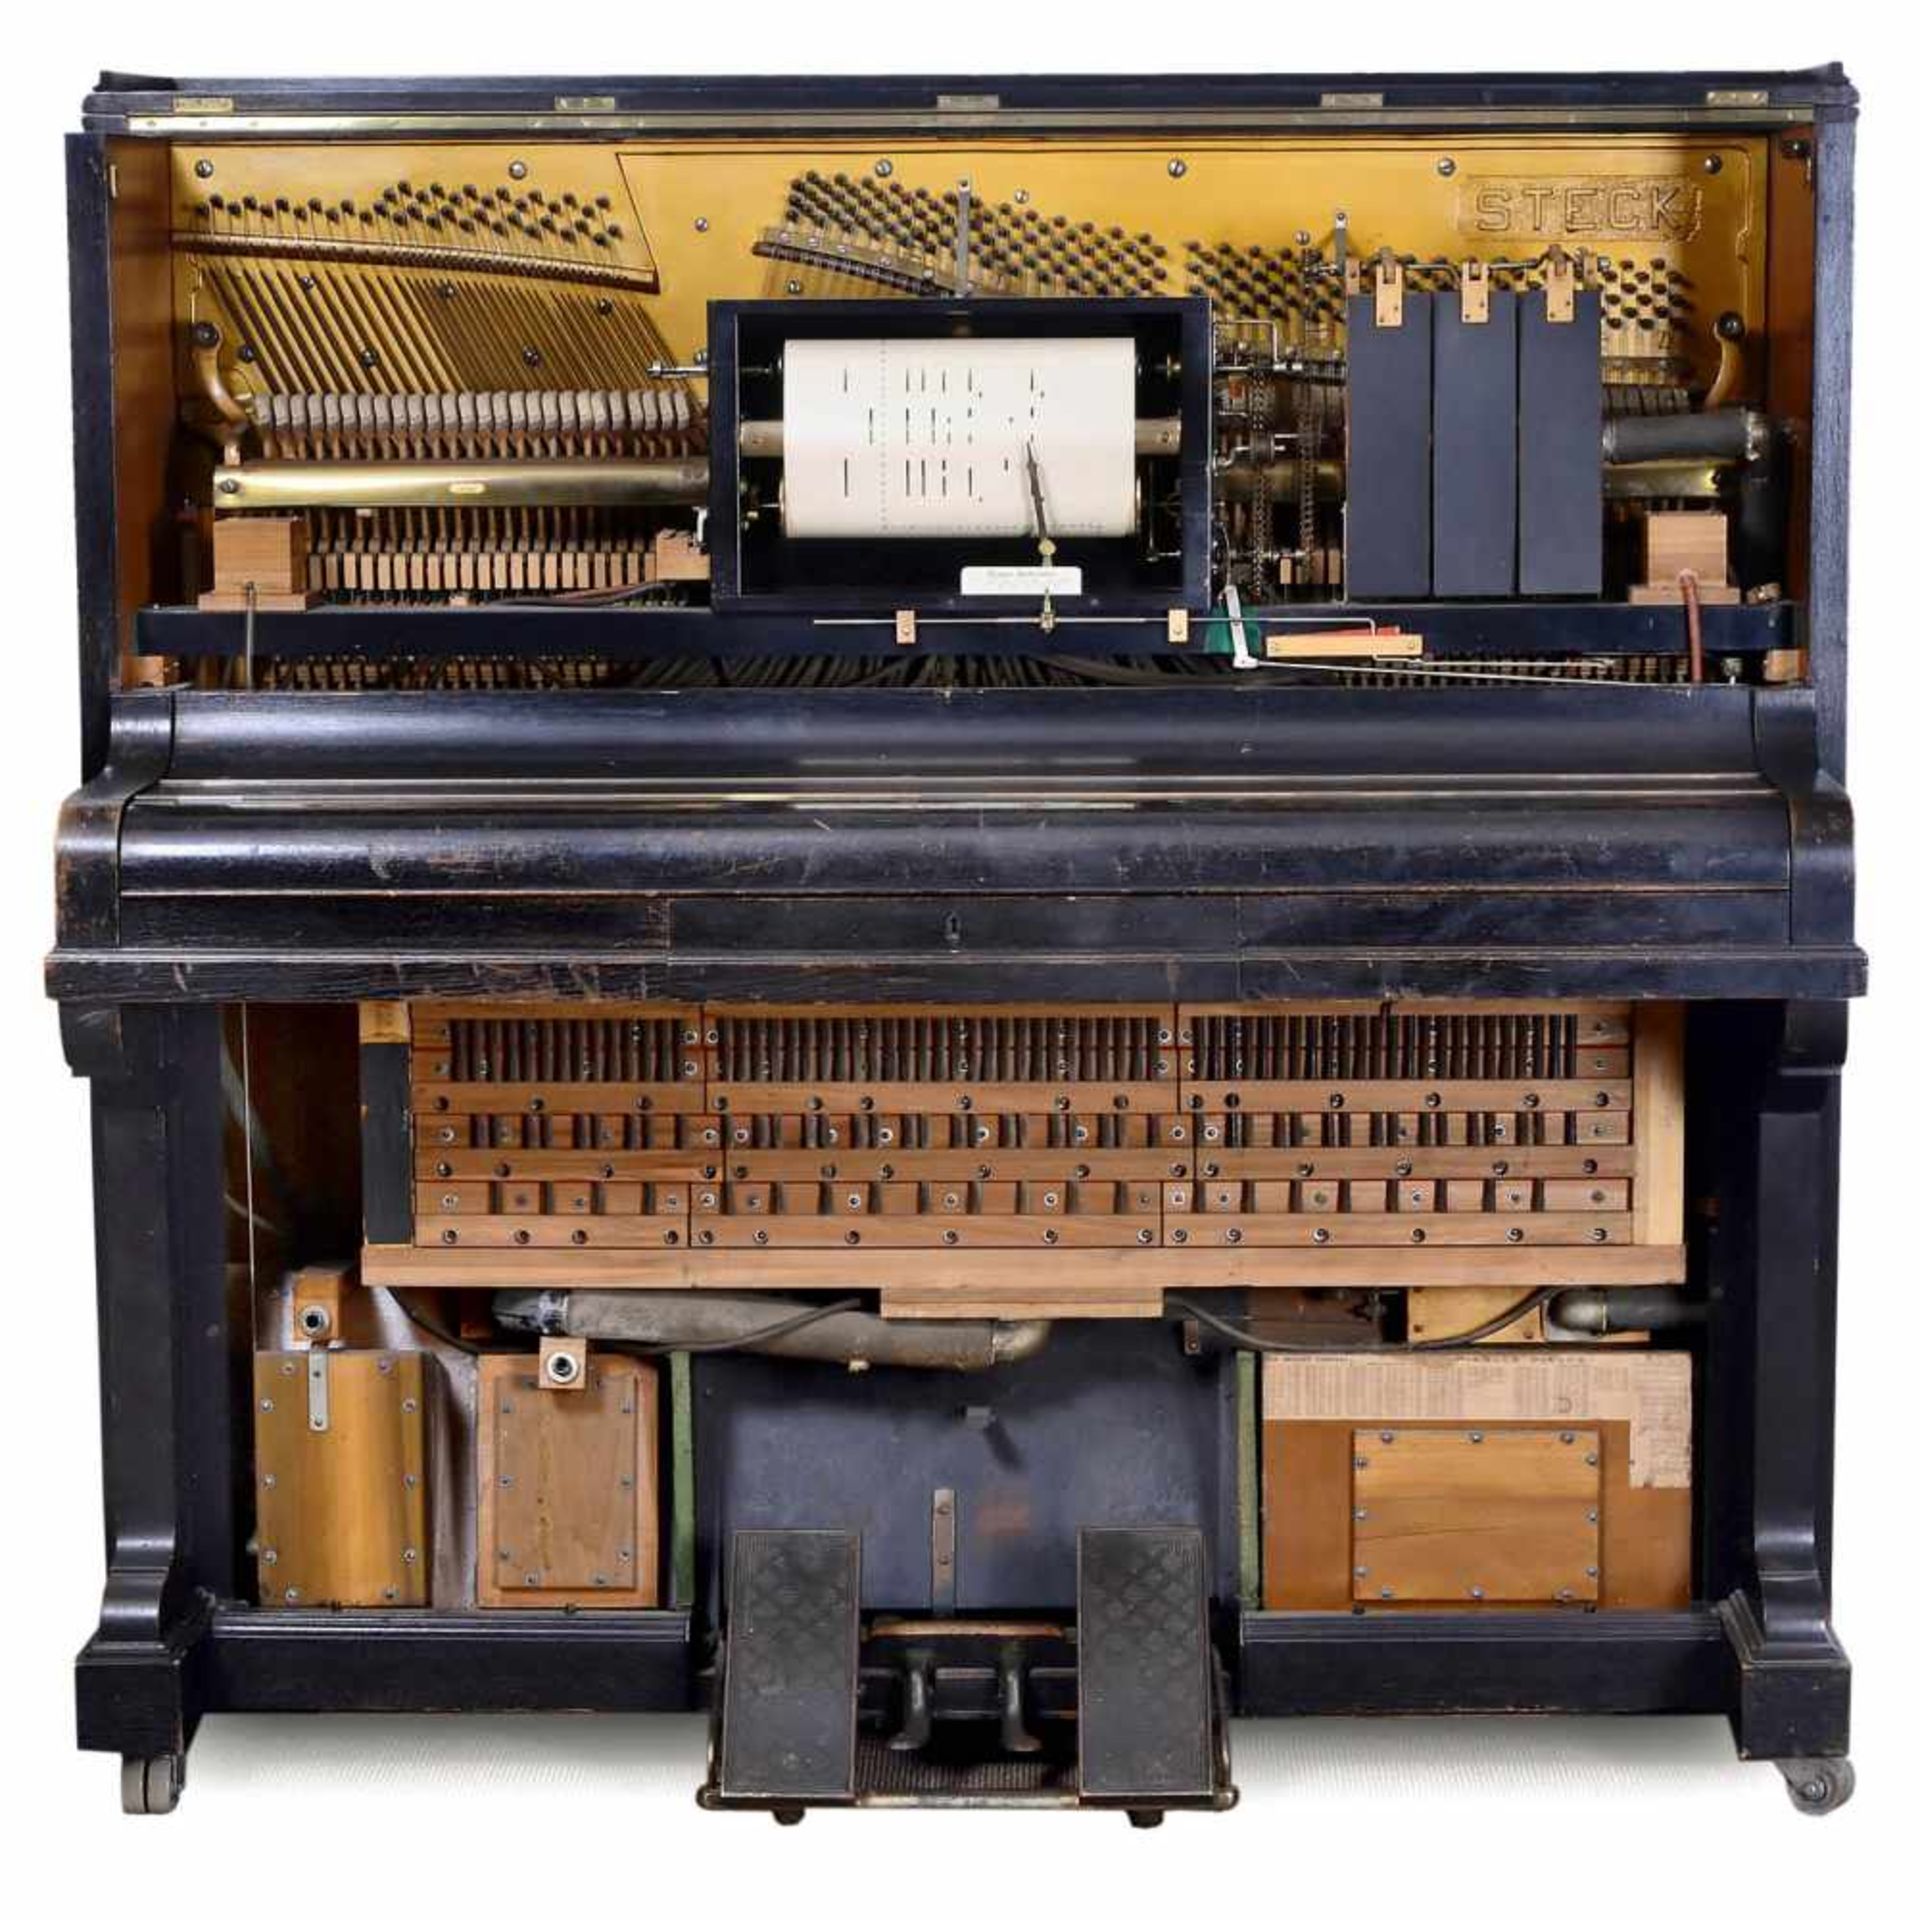 Steck Pianola-Piano, c. 1914Made by Steck Piano-Fabrik, Gotha, Germany. For 65-note rolls, foot- - Bild 2 aus 3